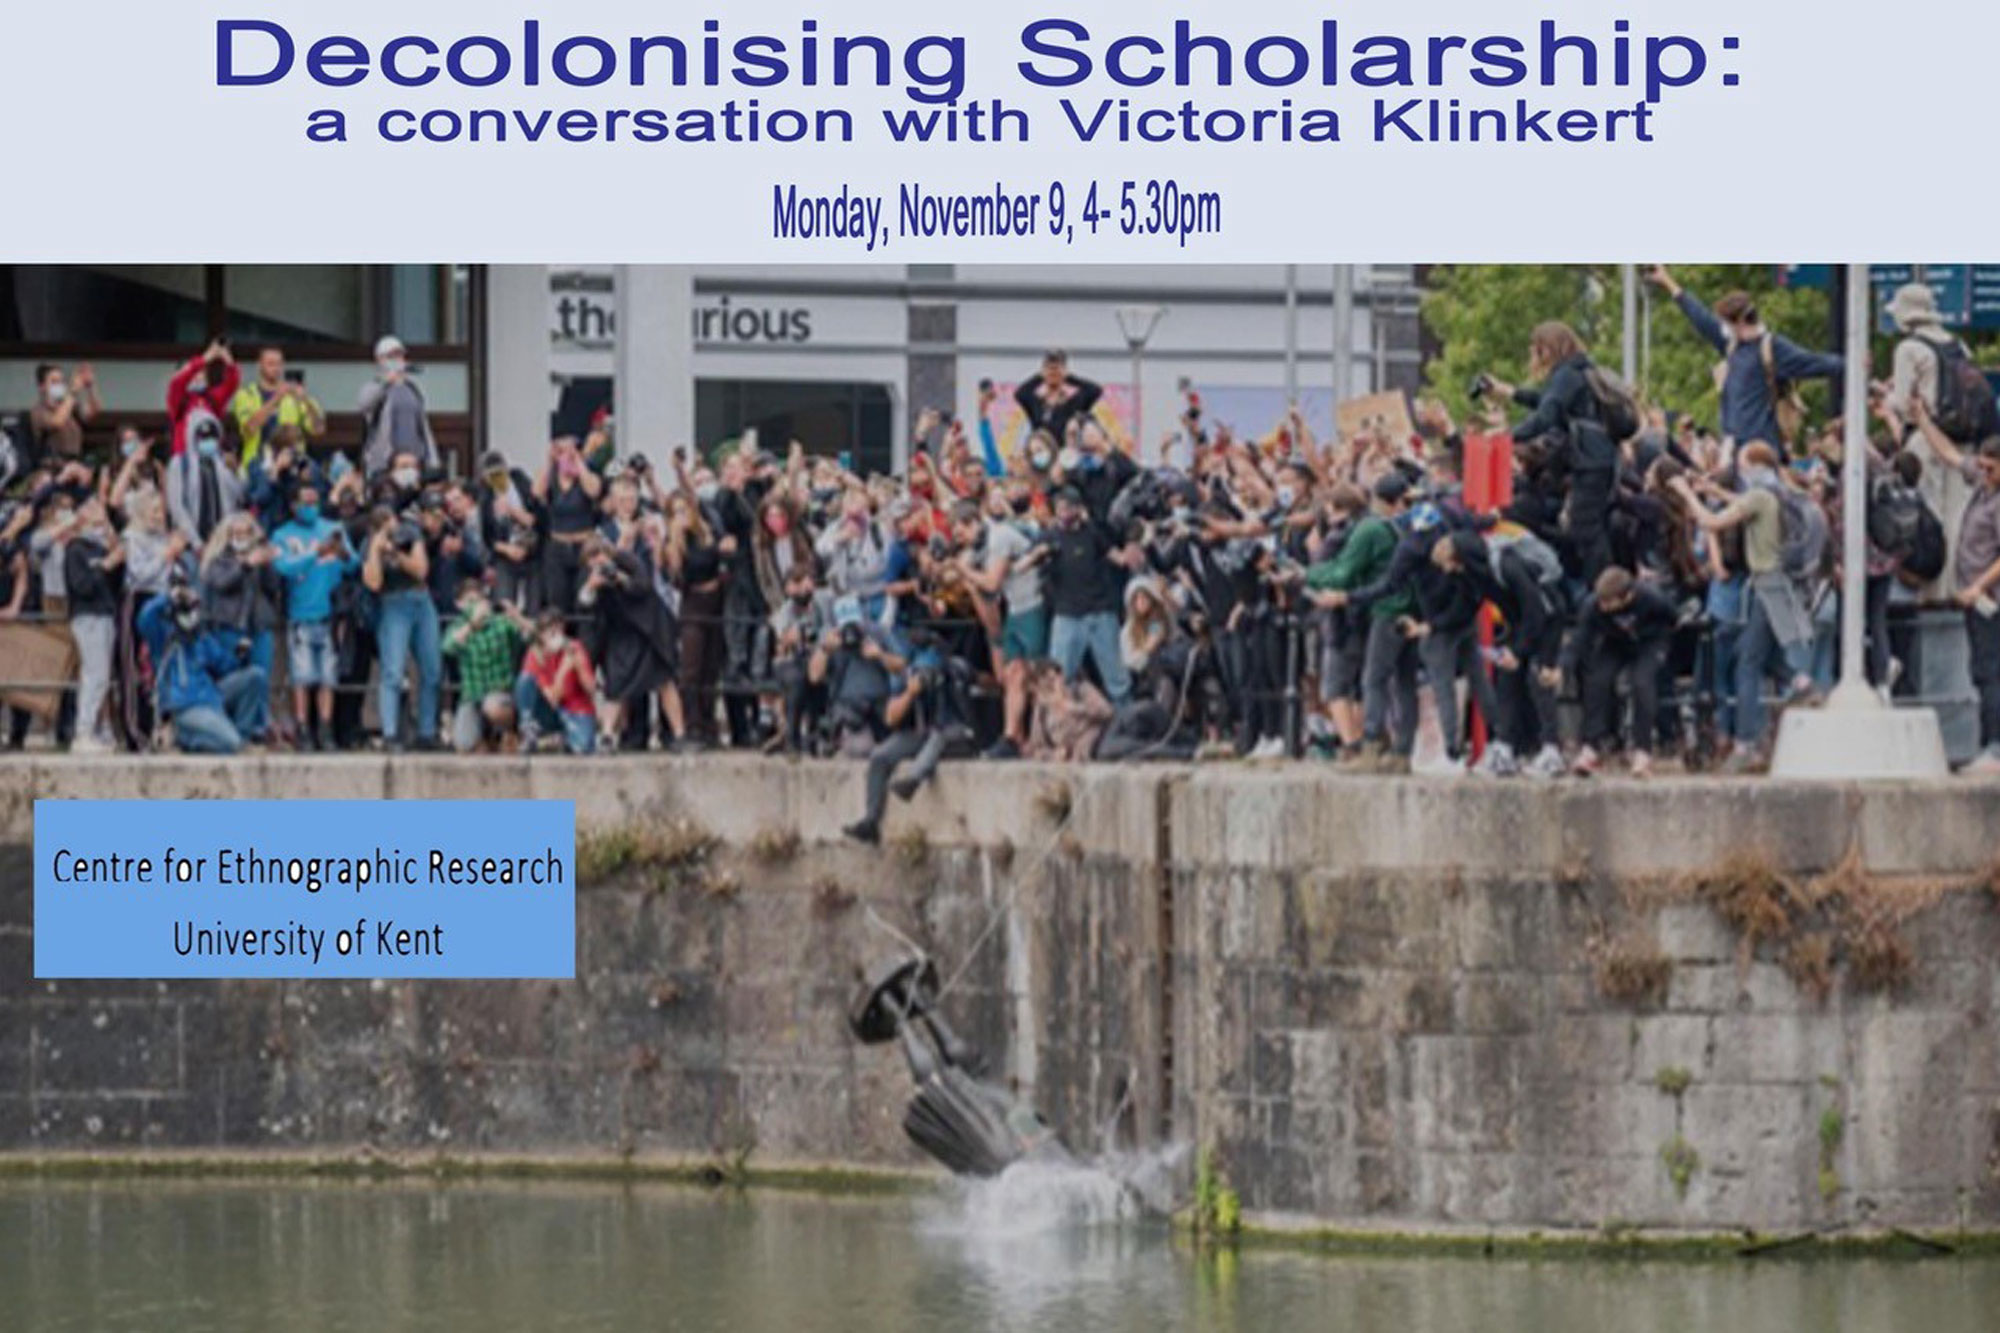 Decolonising scholarship poster featuring an image of the statue of Edward Colston being thrown into the water in Bristol